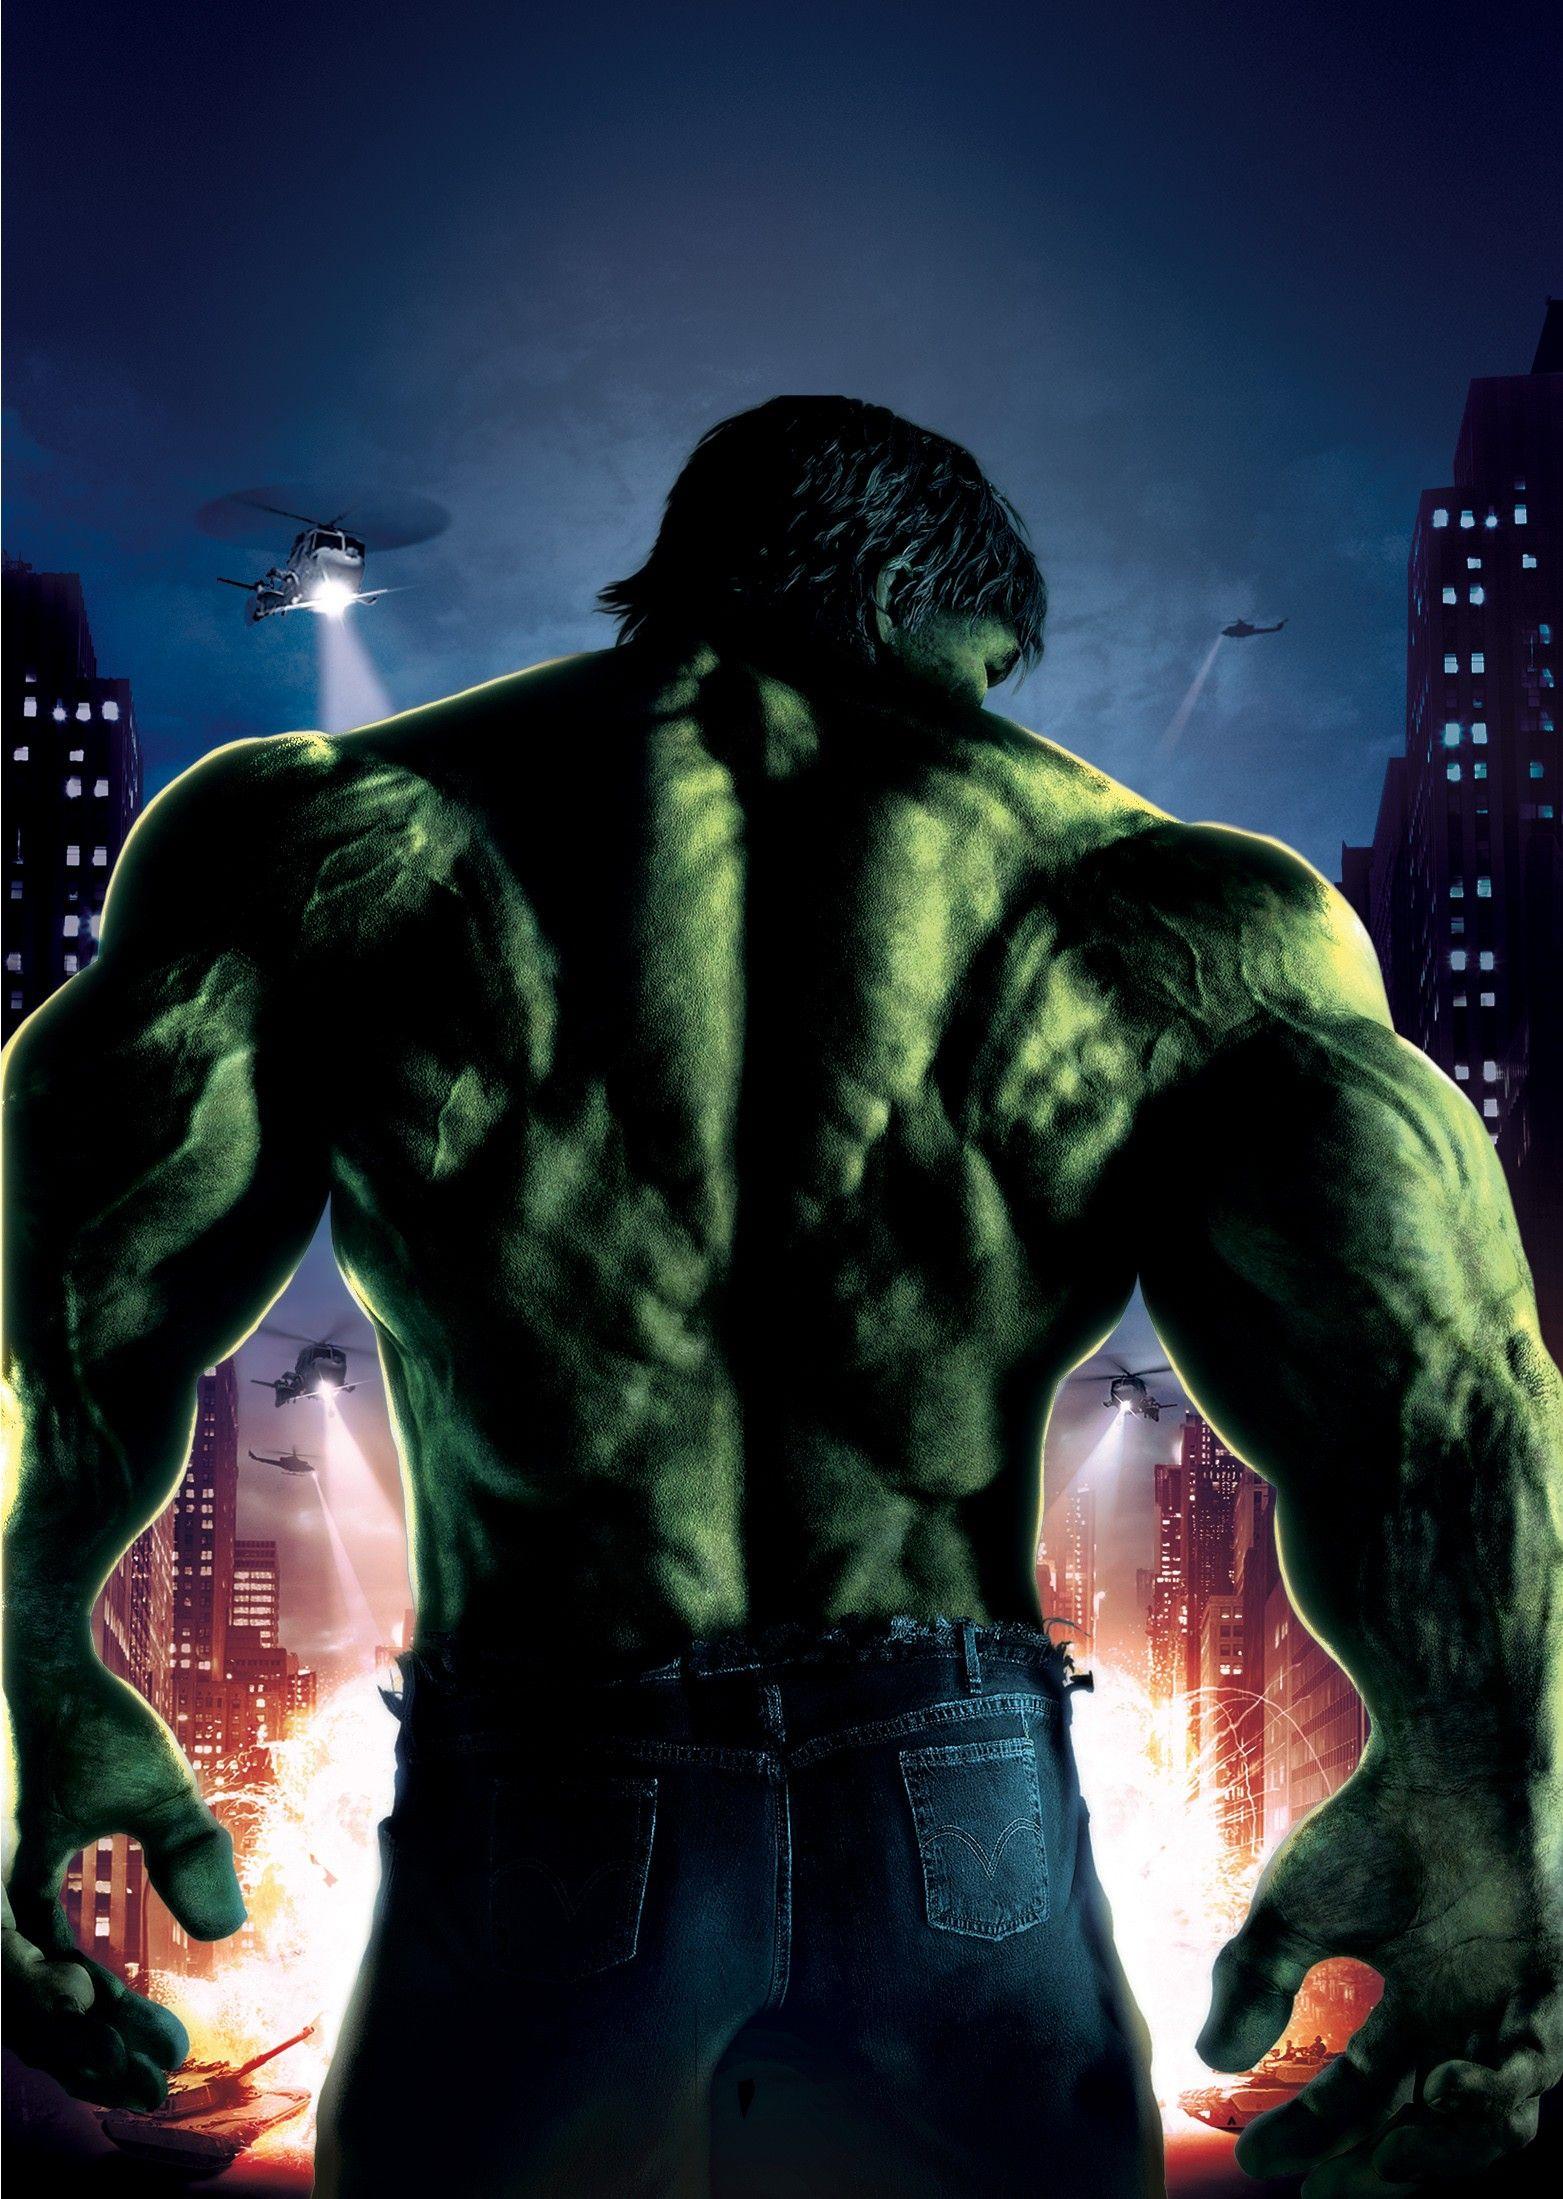 The Hulk Cell Phone Wallpaper Free The Hulk Cell Phone